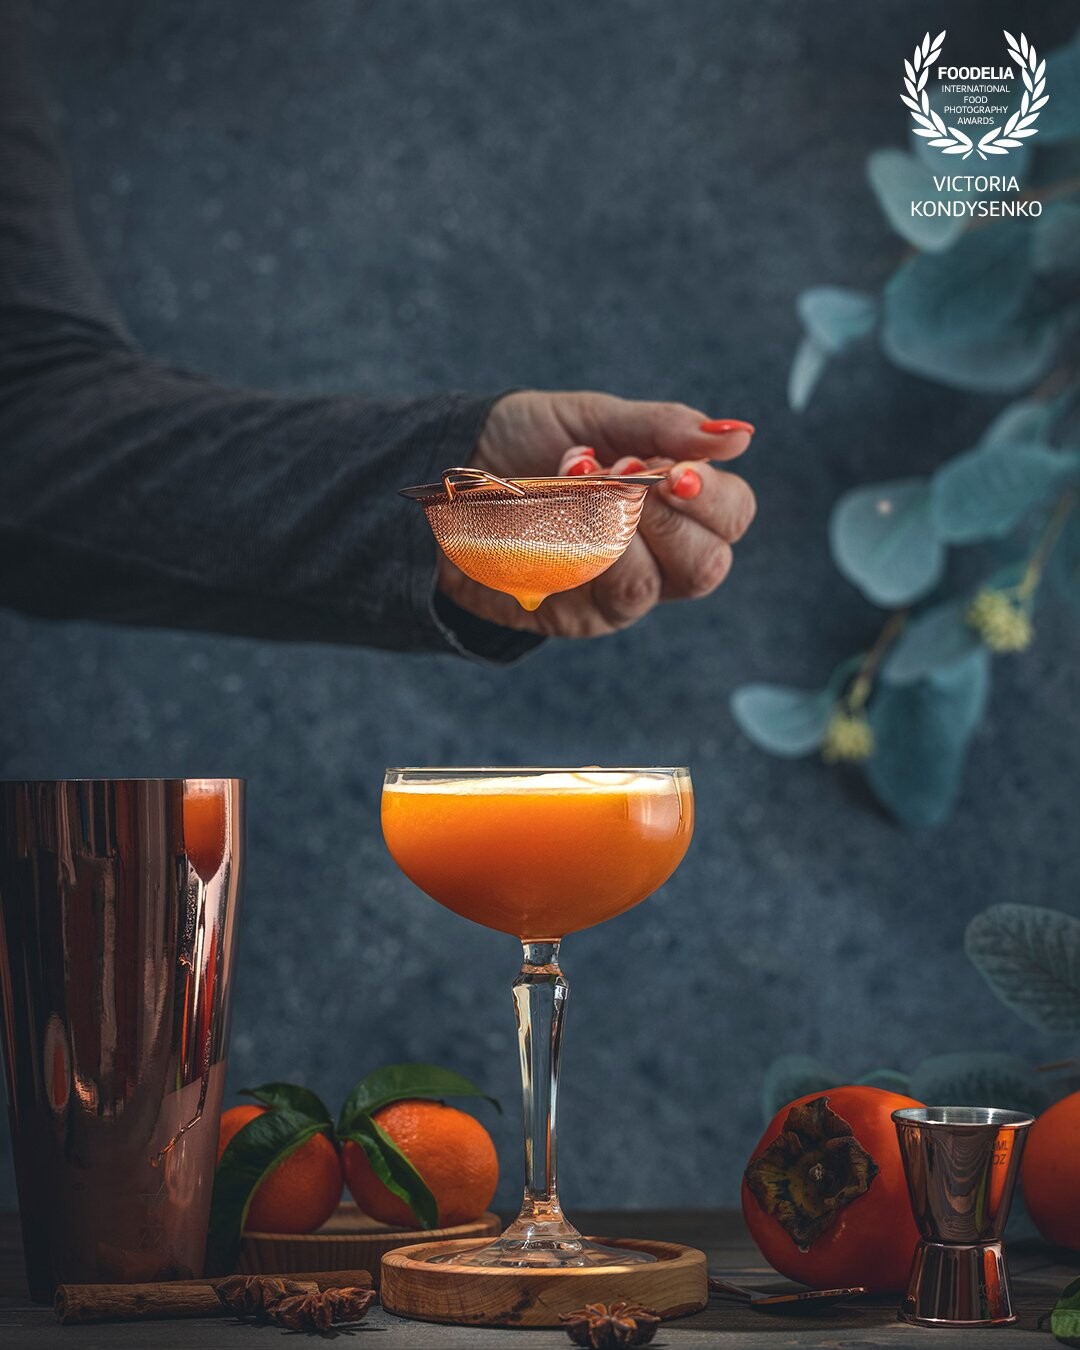 Persimmon my absolutely love. Colorful autumn, secrets, sweetness, tart, juicy... Crazy passion of life.<br />
Persimmon Ginger Gin Fizz cocktail<br />
* * *<br />
Used equipment:<br />
Canon EOS R<br />
Canon RF 100mm F2.8L Macro IS USM<br />
Speedlite 430EX II<br />
Godox V860II